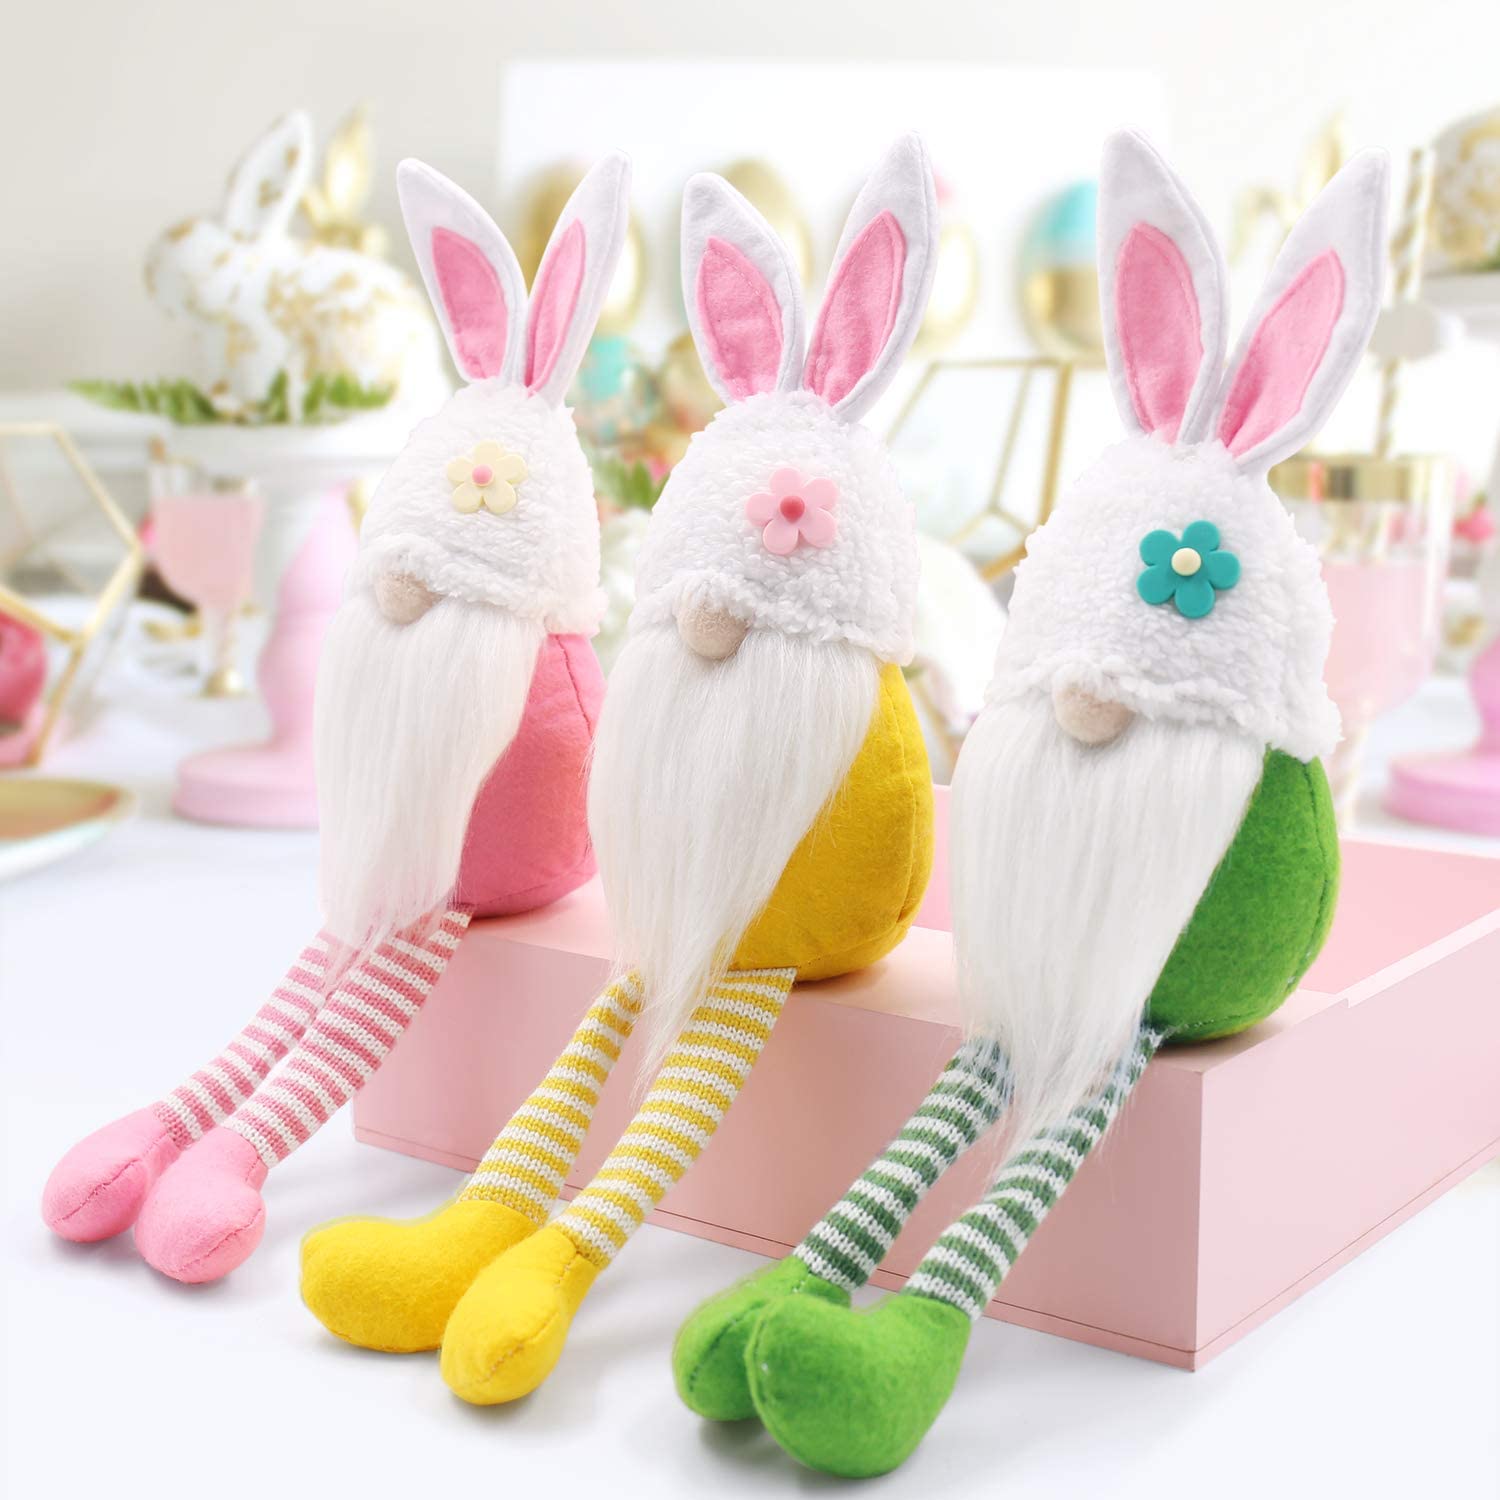 Bunny Gnomes Girls Birthday Gift Rabbit Tomte Nordic Swedish Nisse Scandinavian Tomte Elf Dwarf Home Household Decor Spring Easter Collectible Figurine Set of 3: Kitchen & Dining